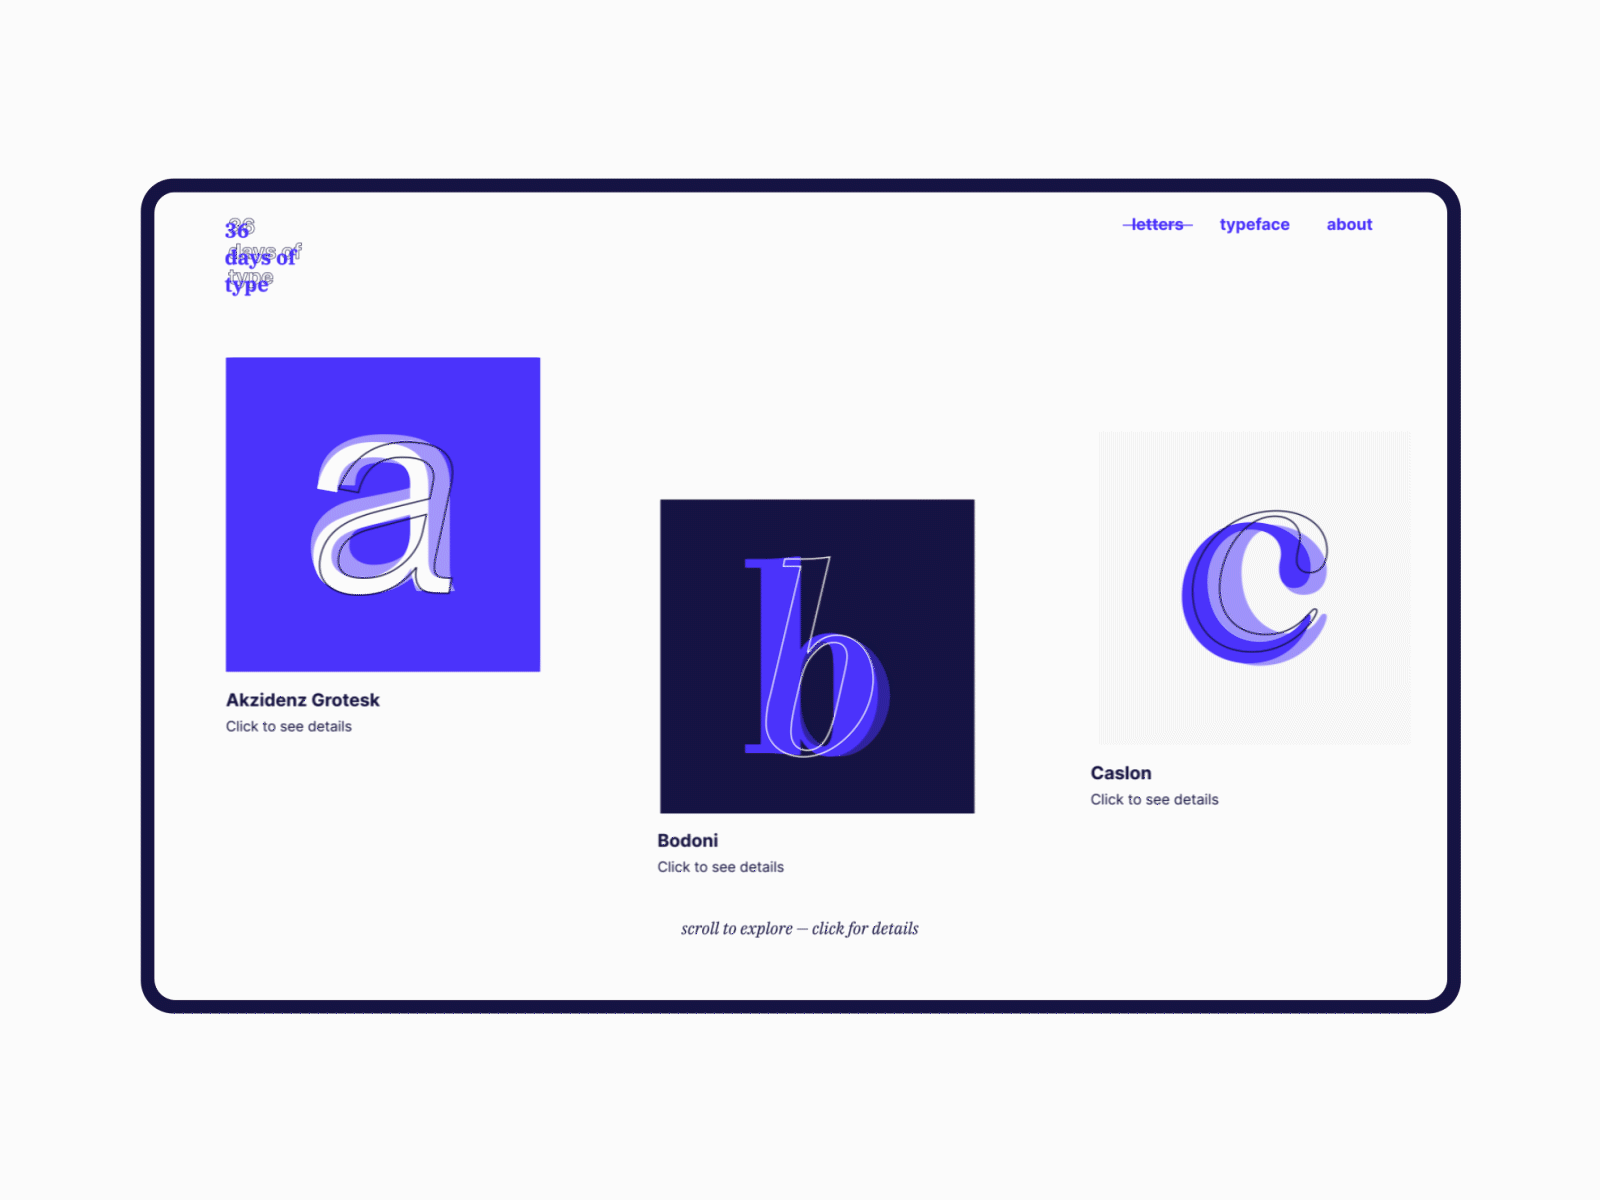 #36daysoftype — single letter page 36 days of type animation design graphic graphic design interaction interaction design motion motion graphics page transition parallax transition type typography ui ux web design website website concept website design